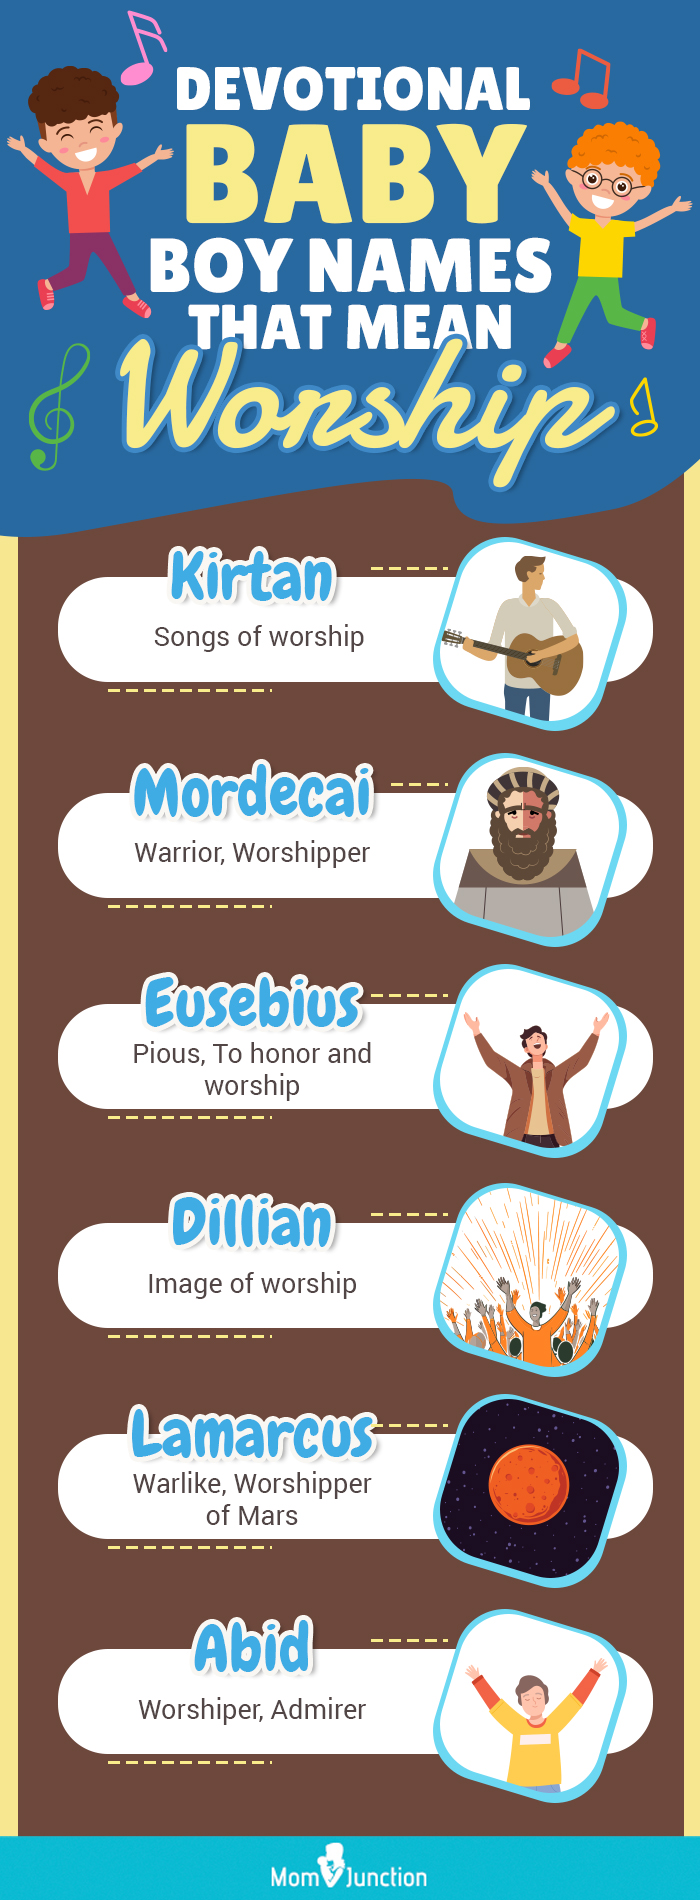 devotional baby boy names that mean worship (infographic)